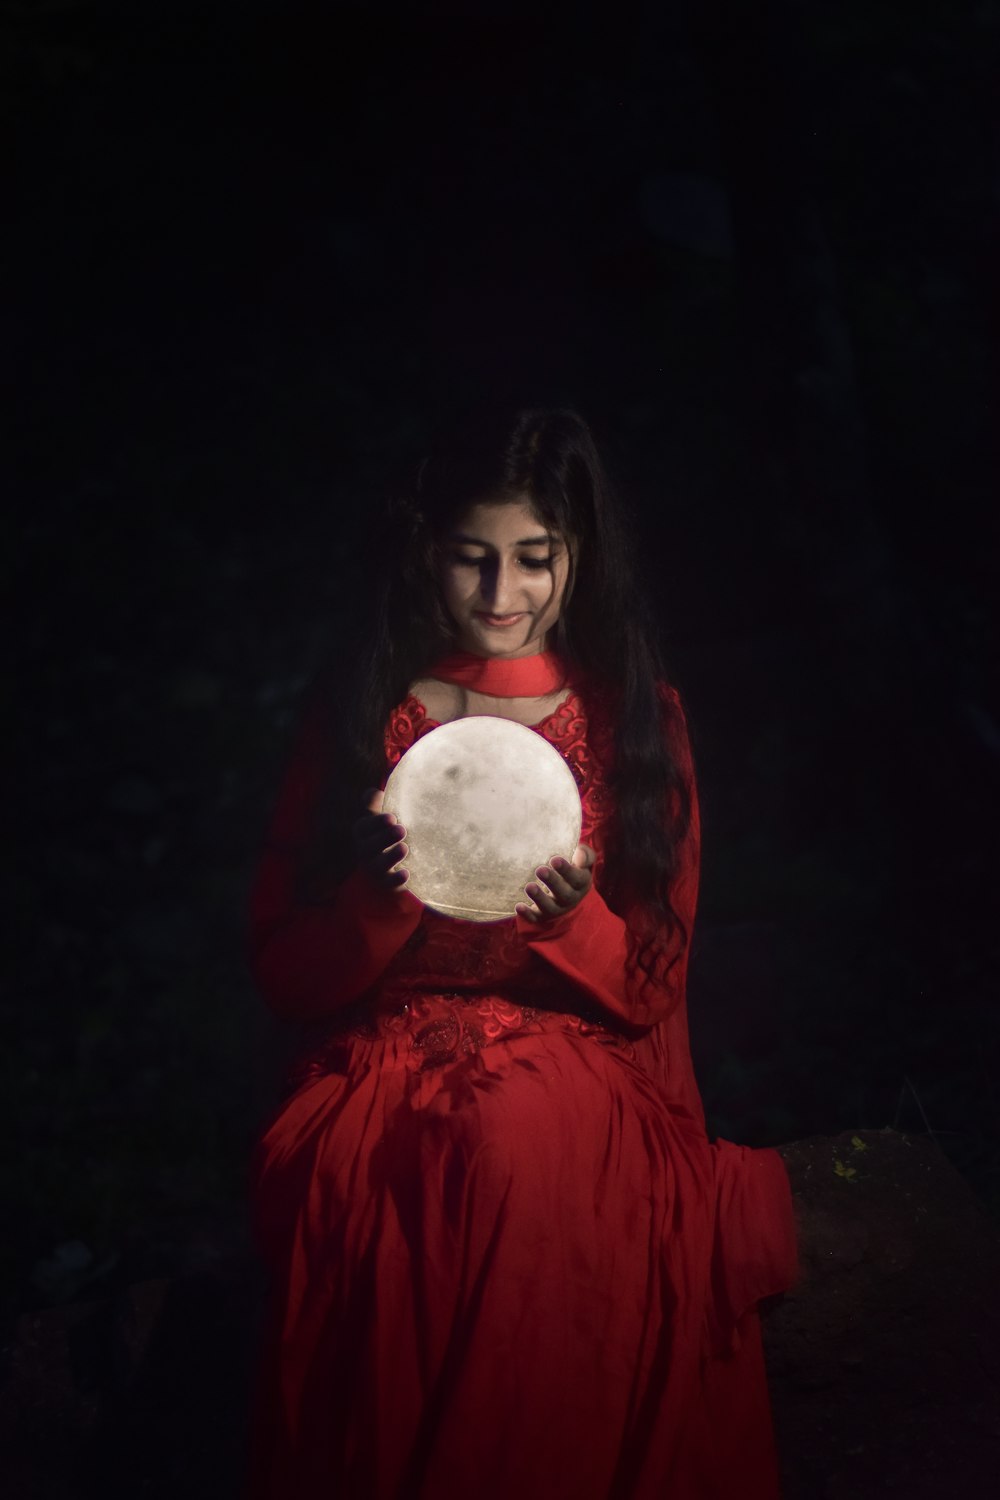 woman in red dress holding white plush toy